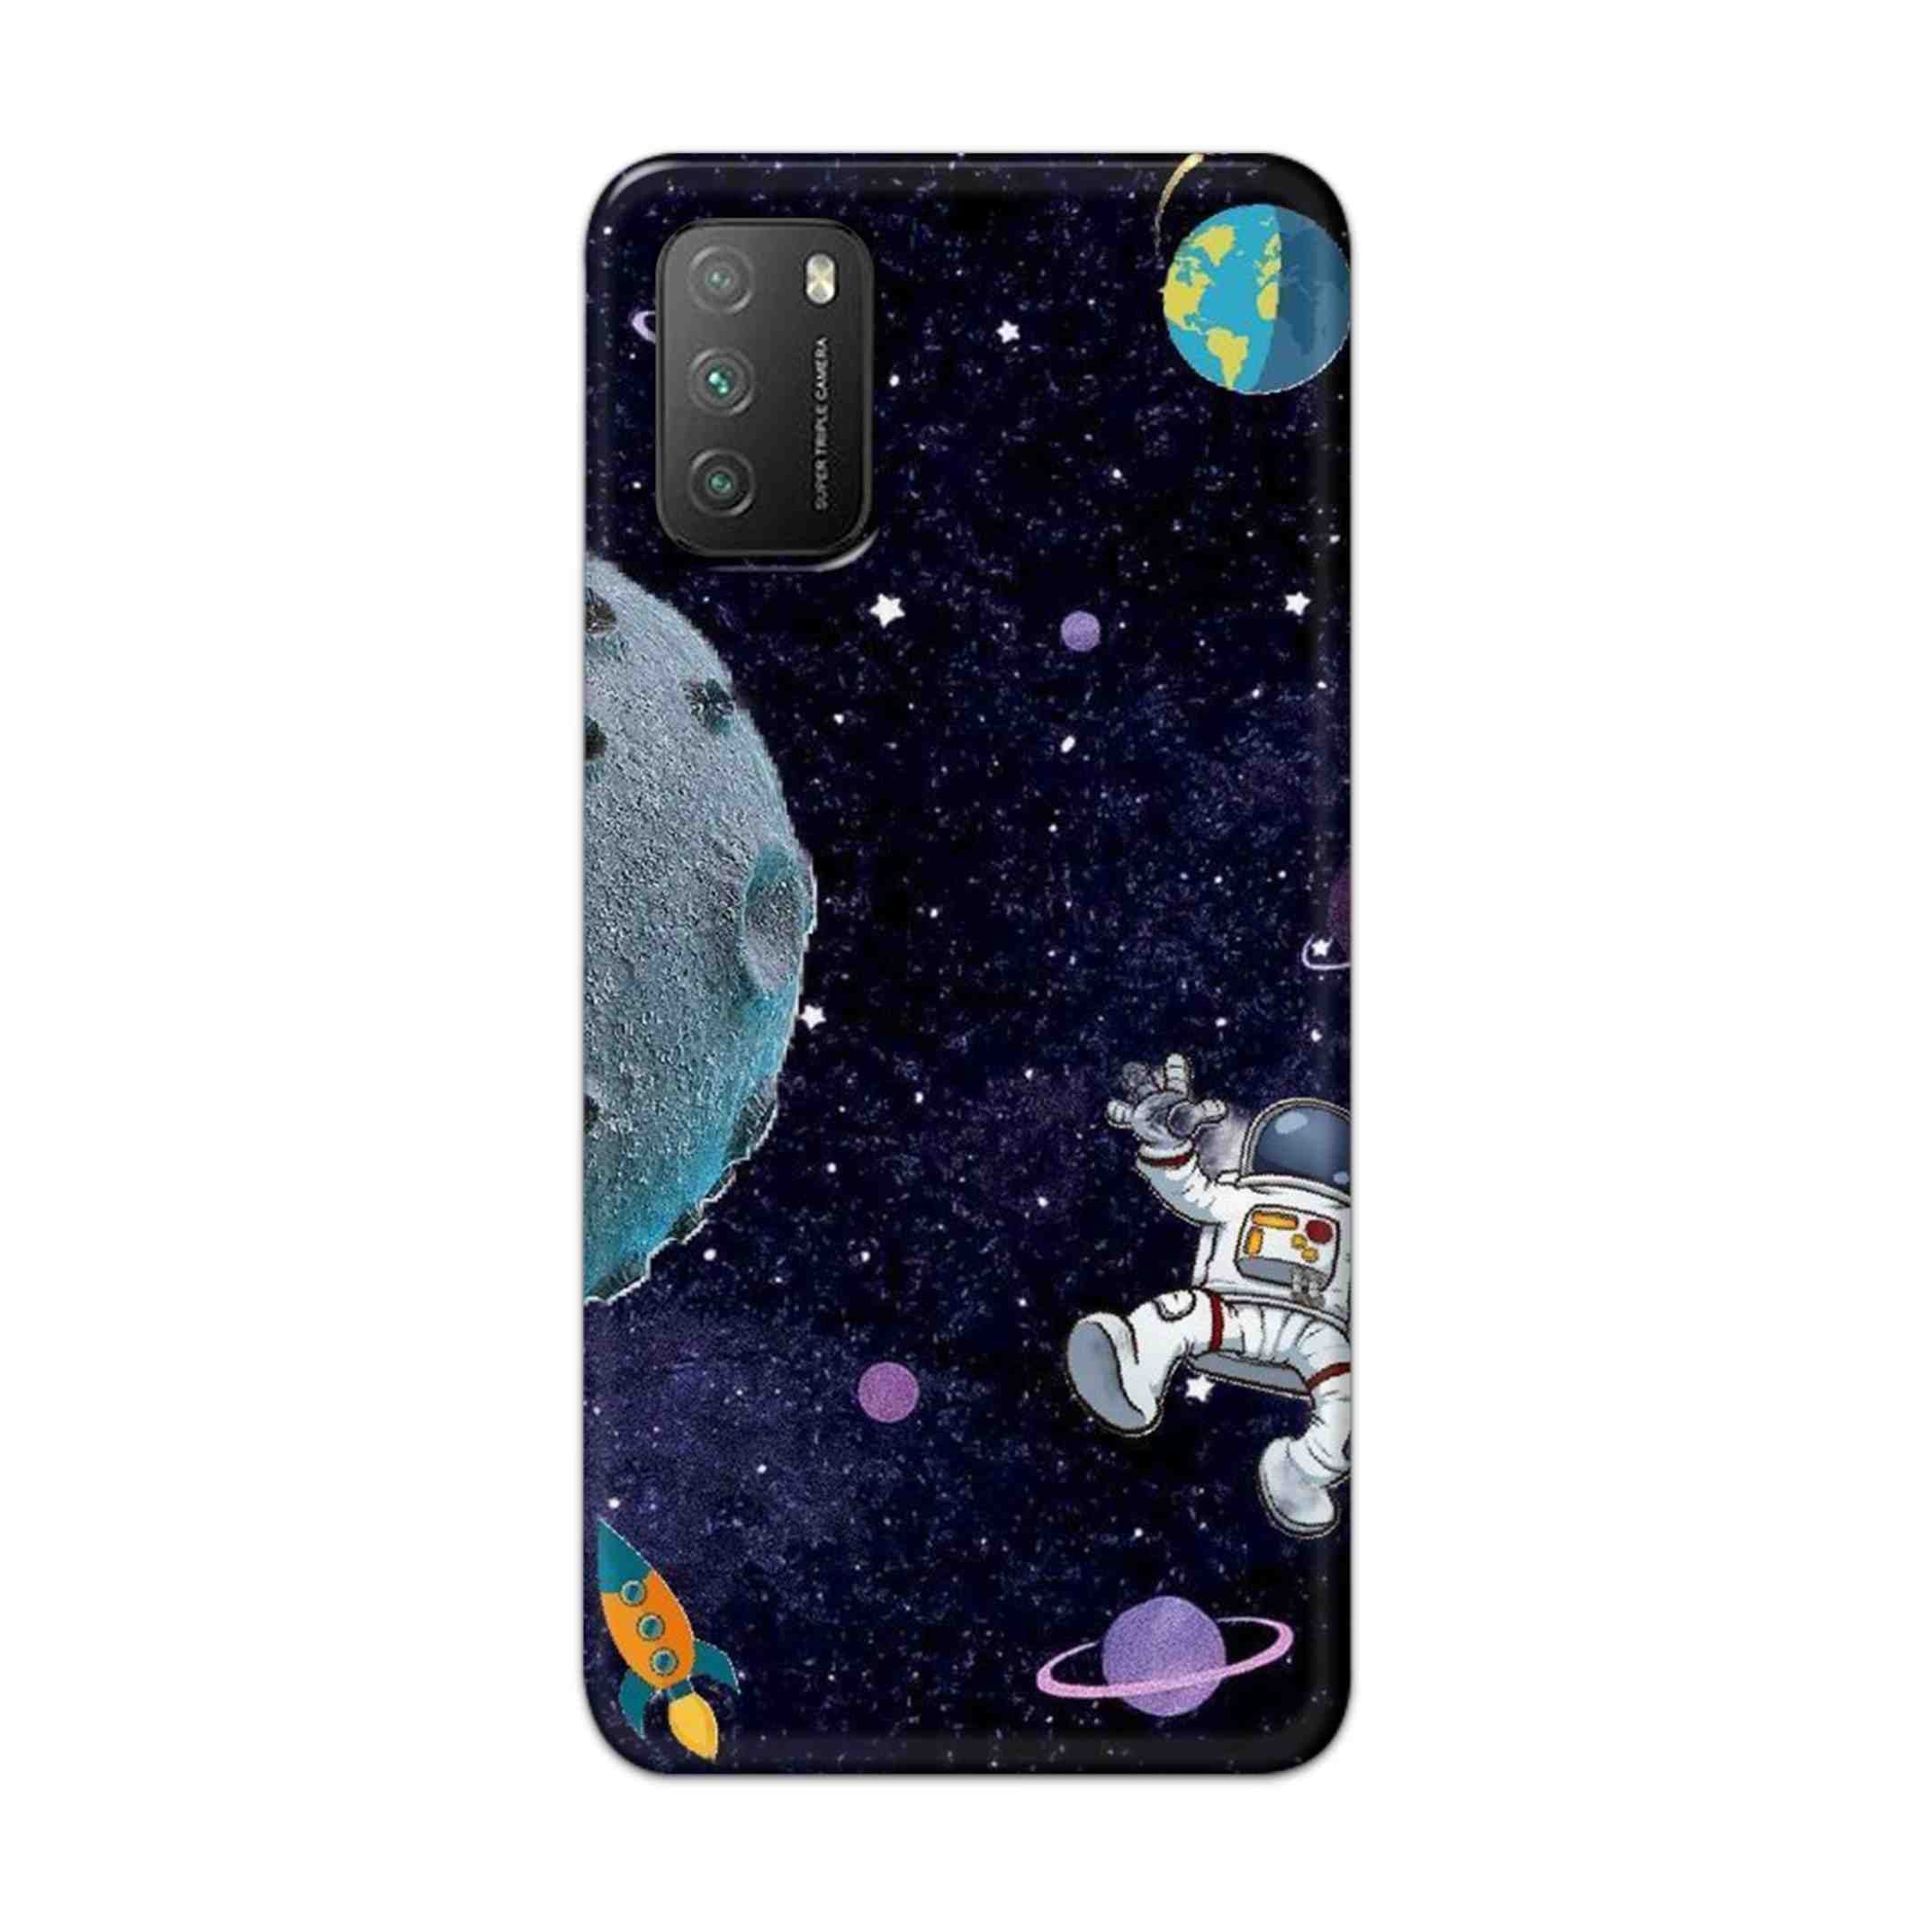 Buy Space Hard Back Mobile Phone Case Cover For Poco M3 Online